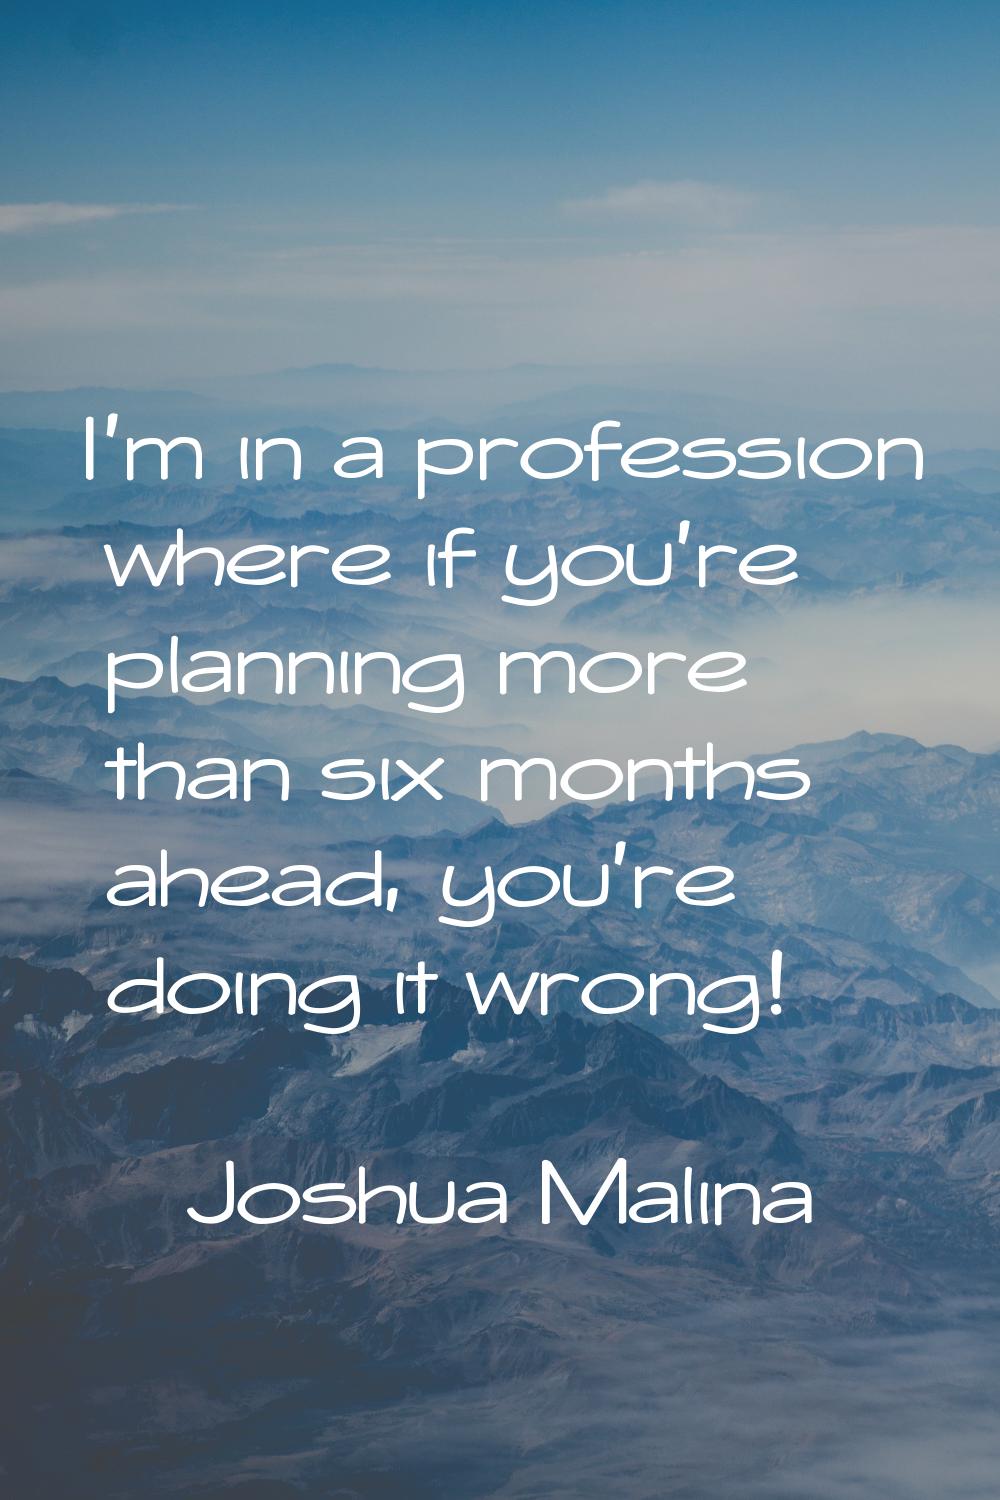 I'm in a profession where if you're planning more than six months ahead, you're doing it wrong!